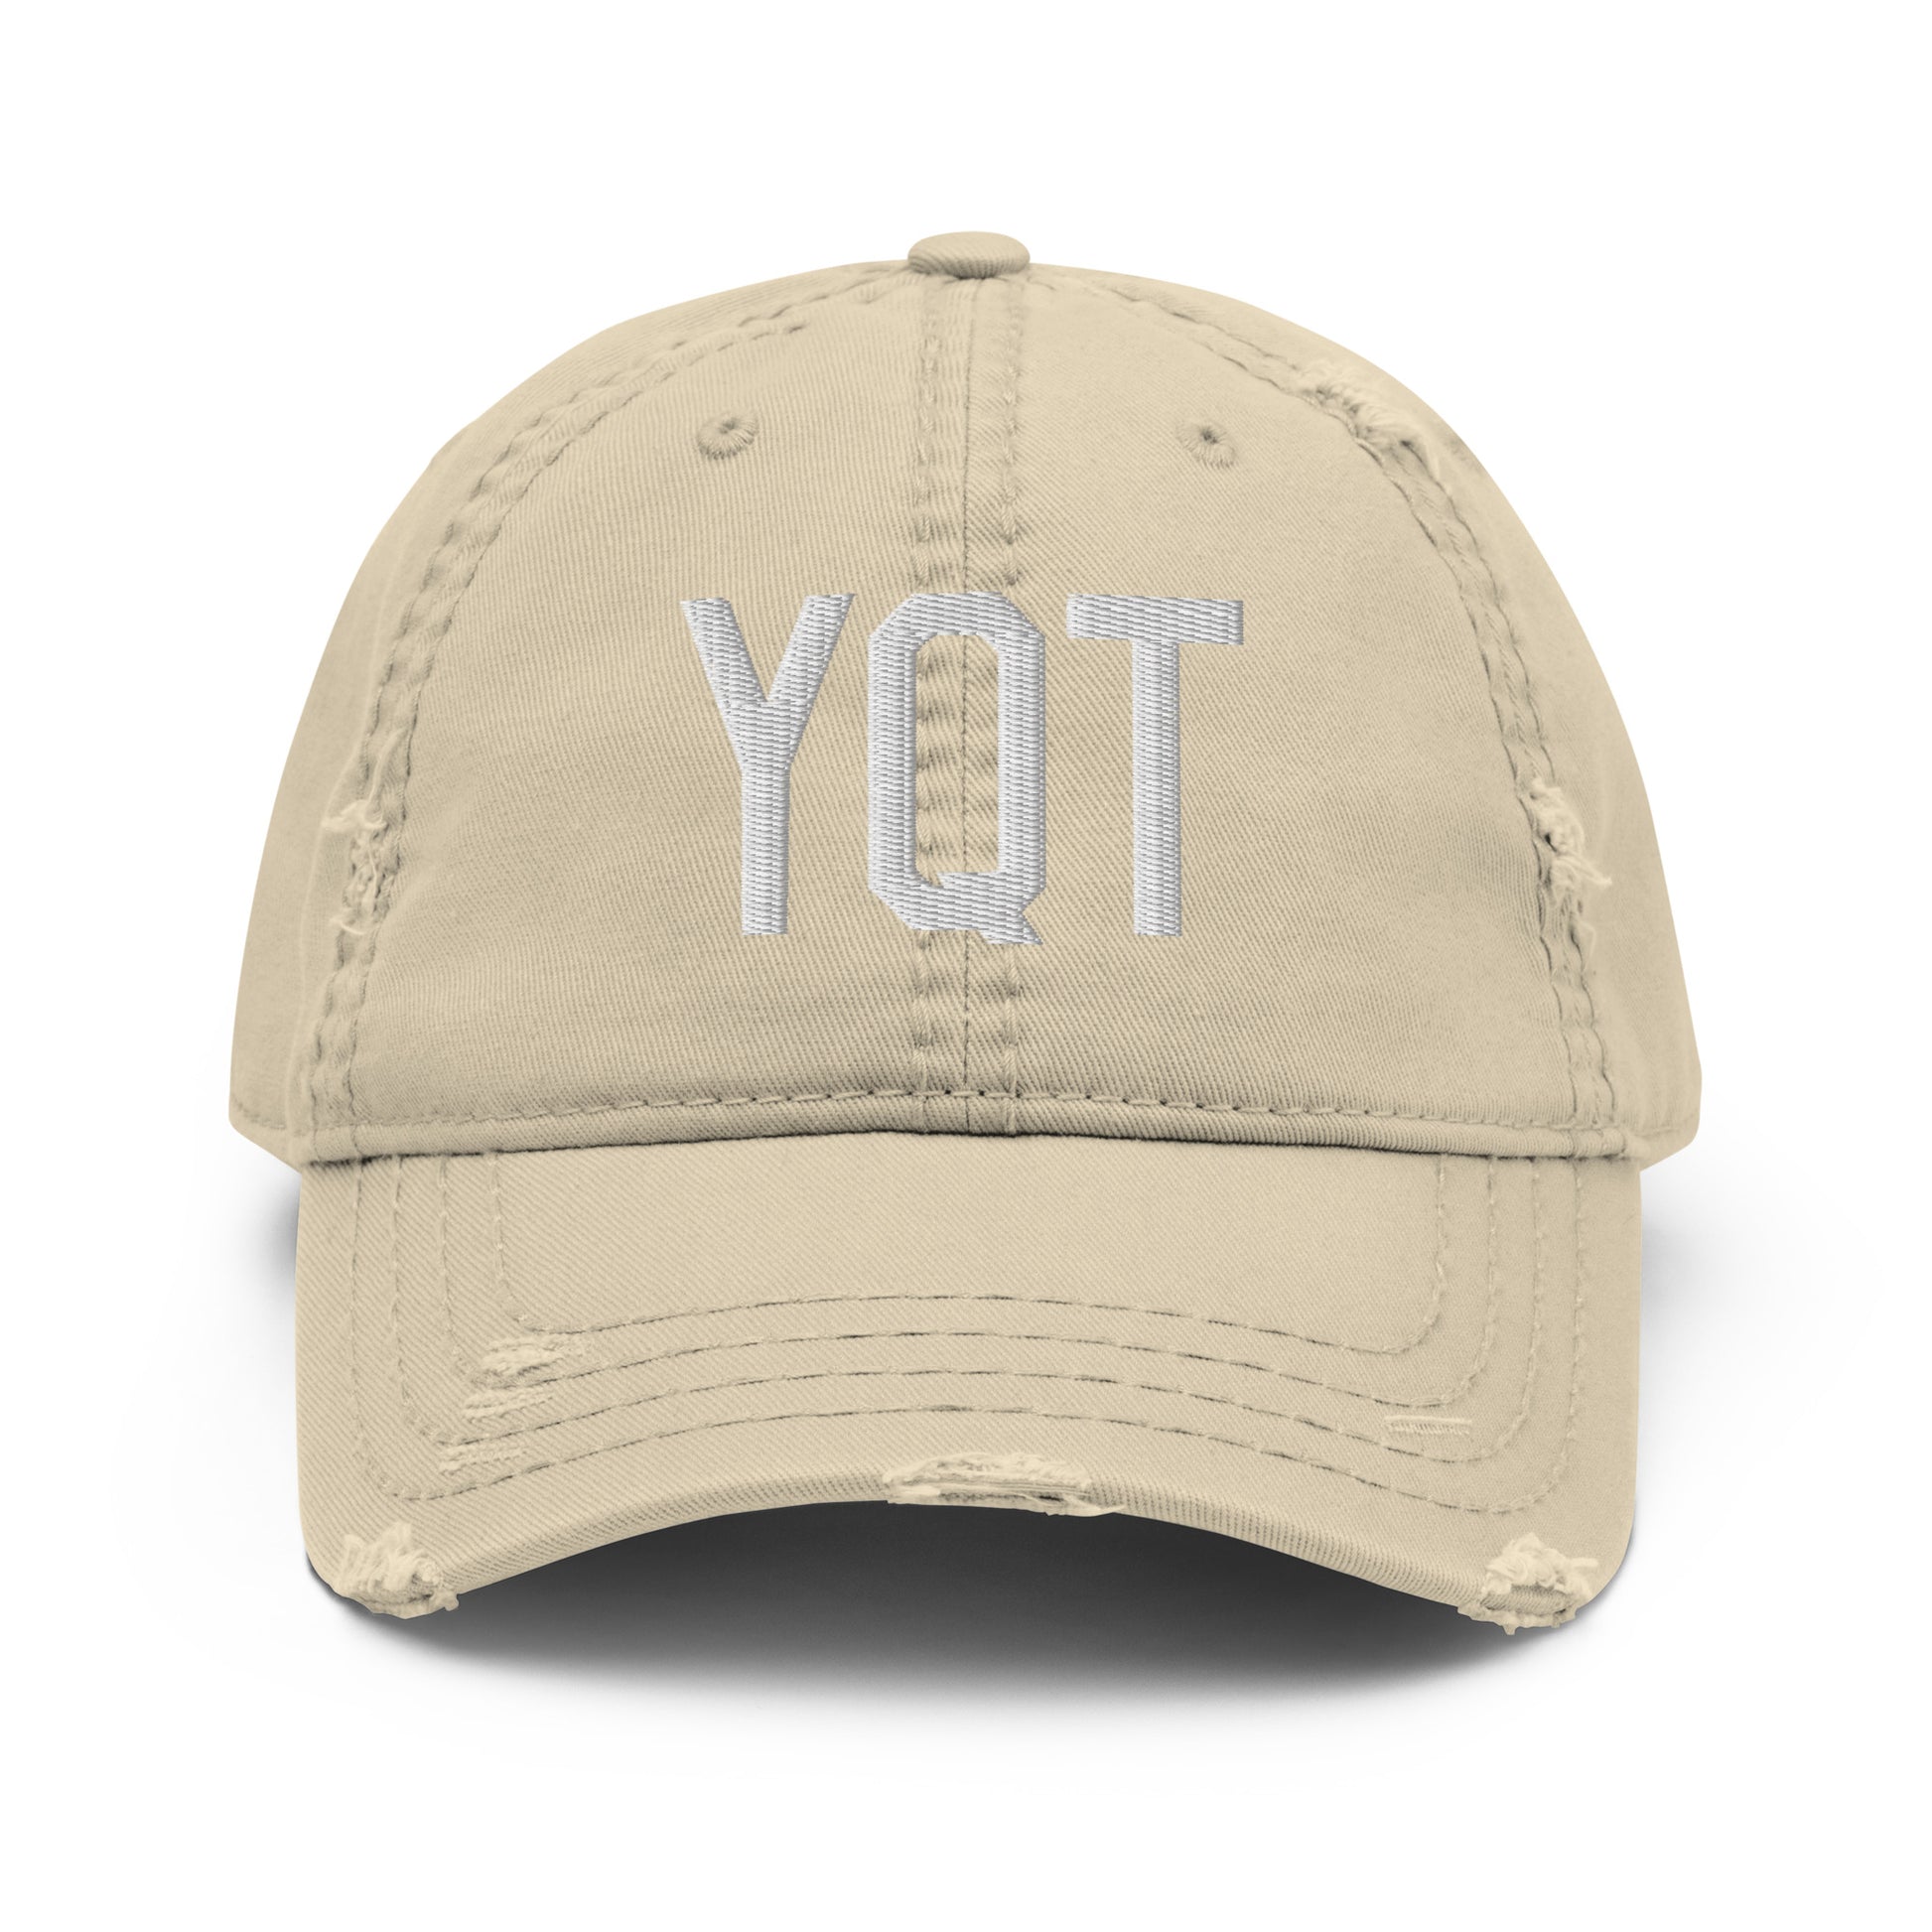 Airport Code Distressed Hat - White • YQT Thunder Bay • YHM Designs - Image 18